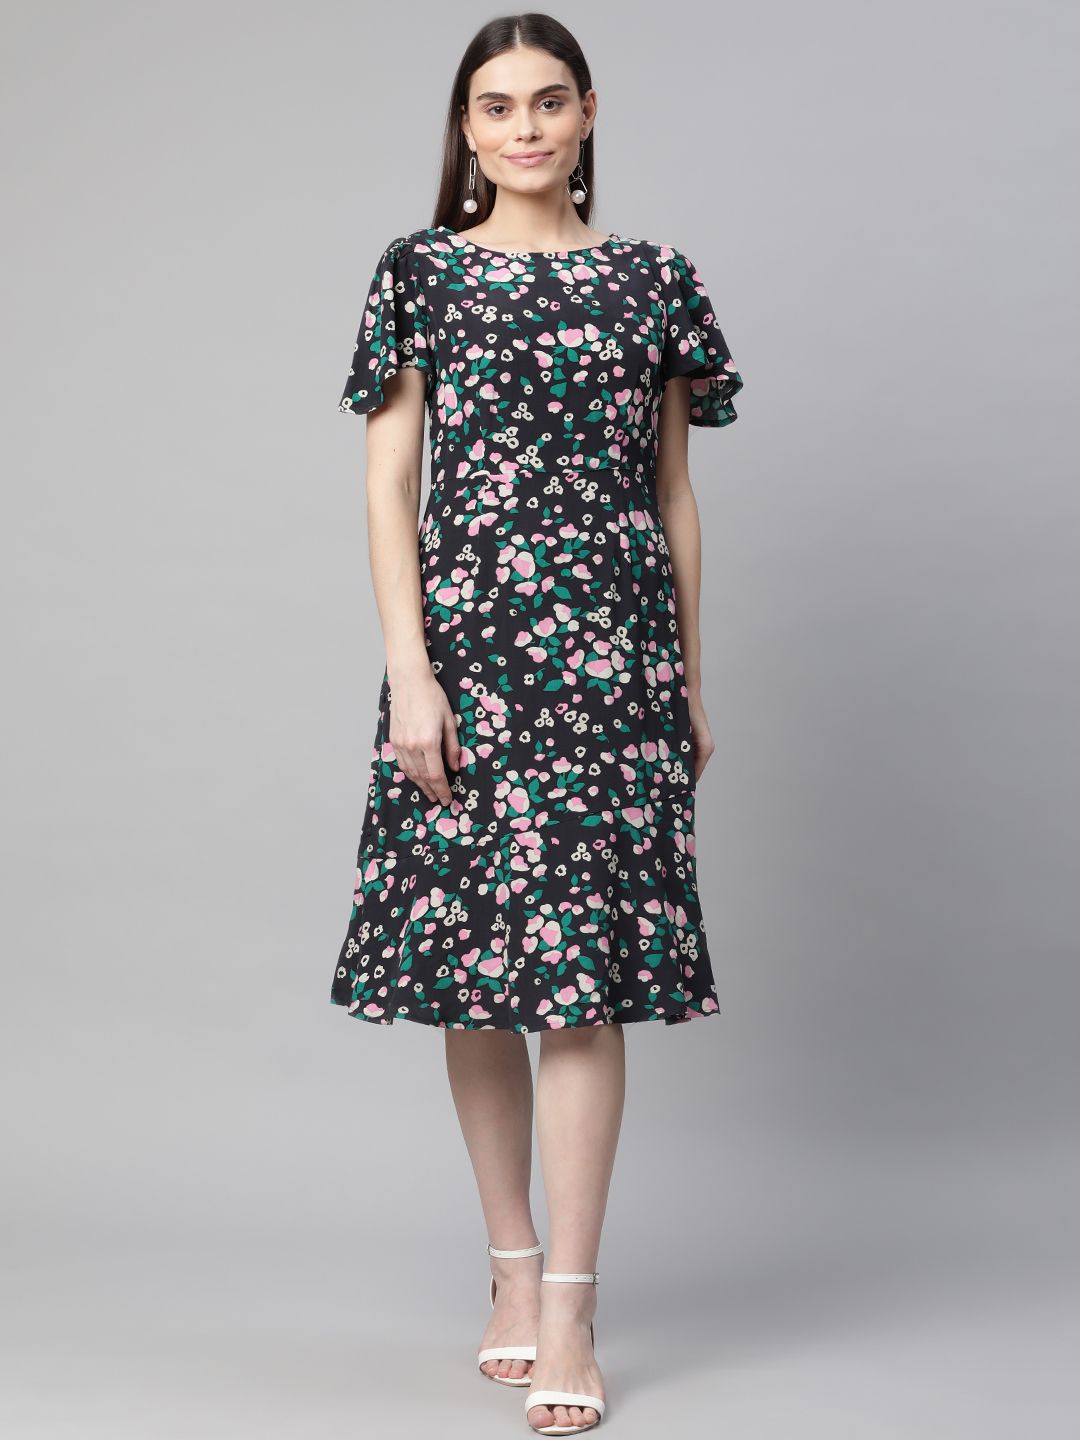 Marks & Spencer Women Black & Pink Floral Print A-Line Midi Dress Price in India